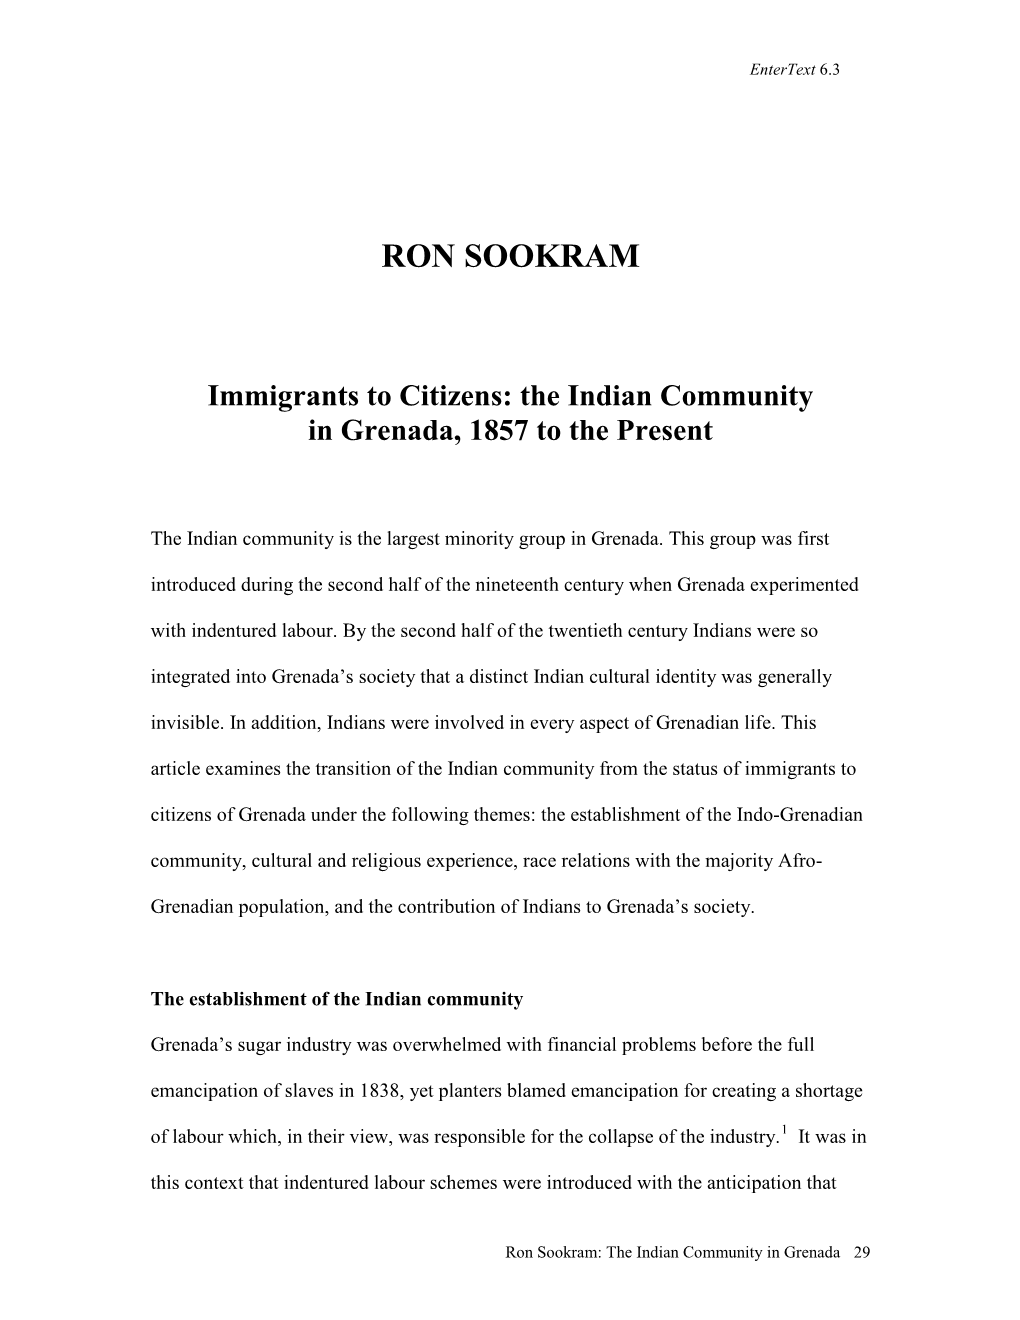 Immigrants to Citizens: the Indian Community in Grenada, 1857 to 2003